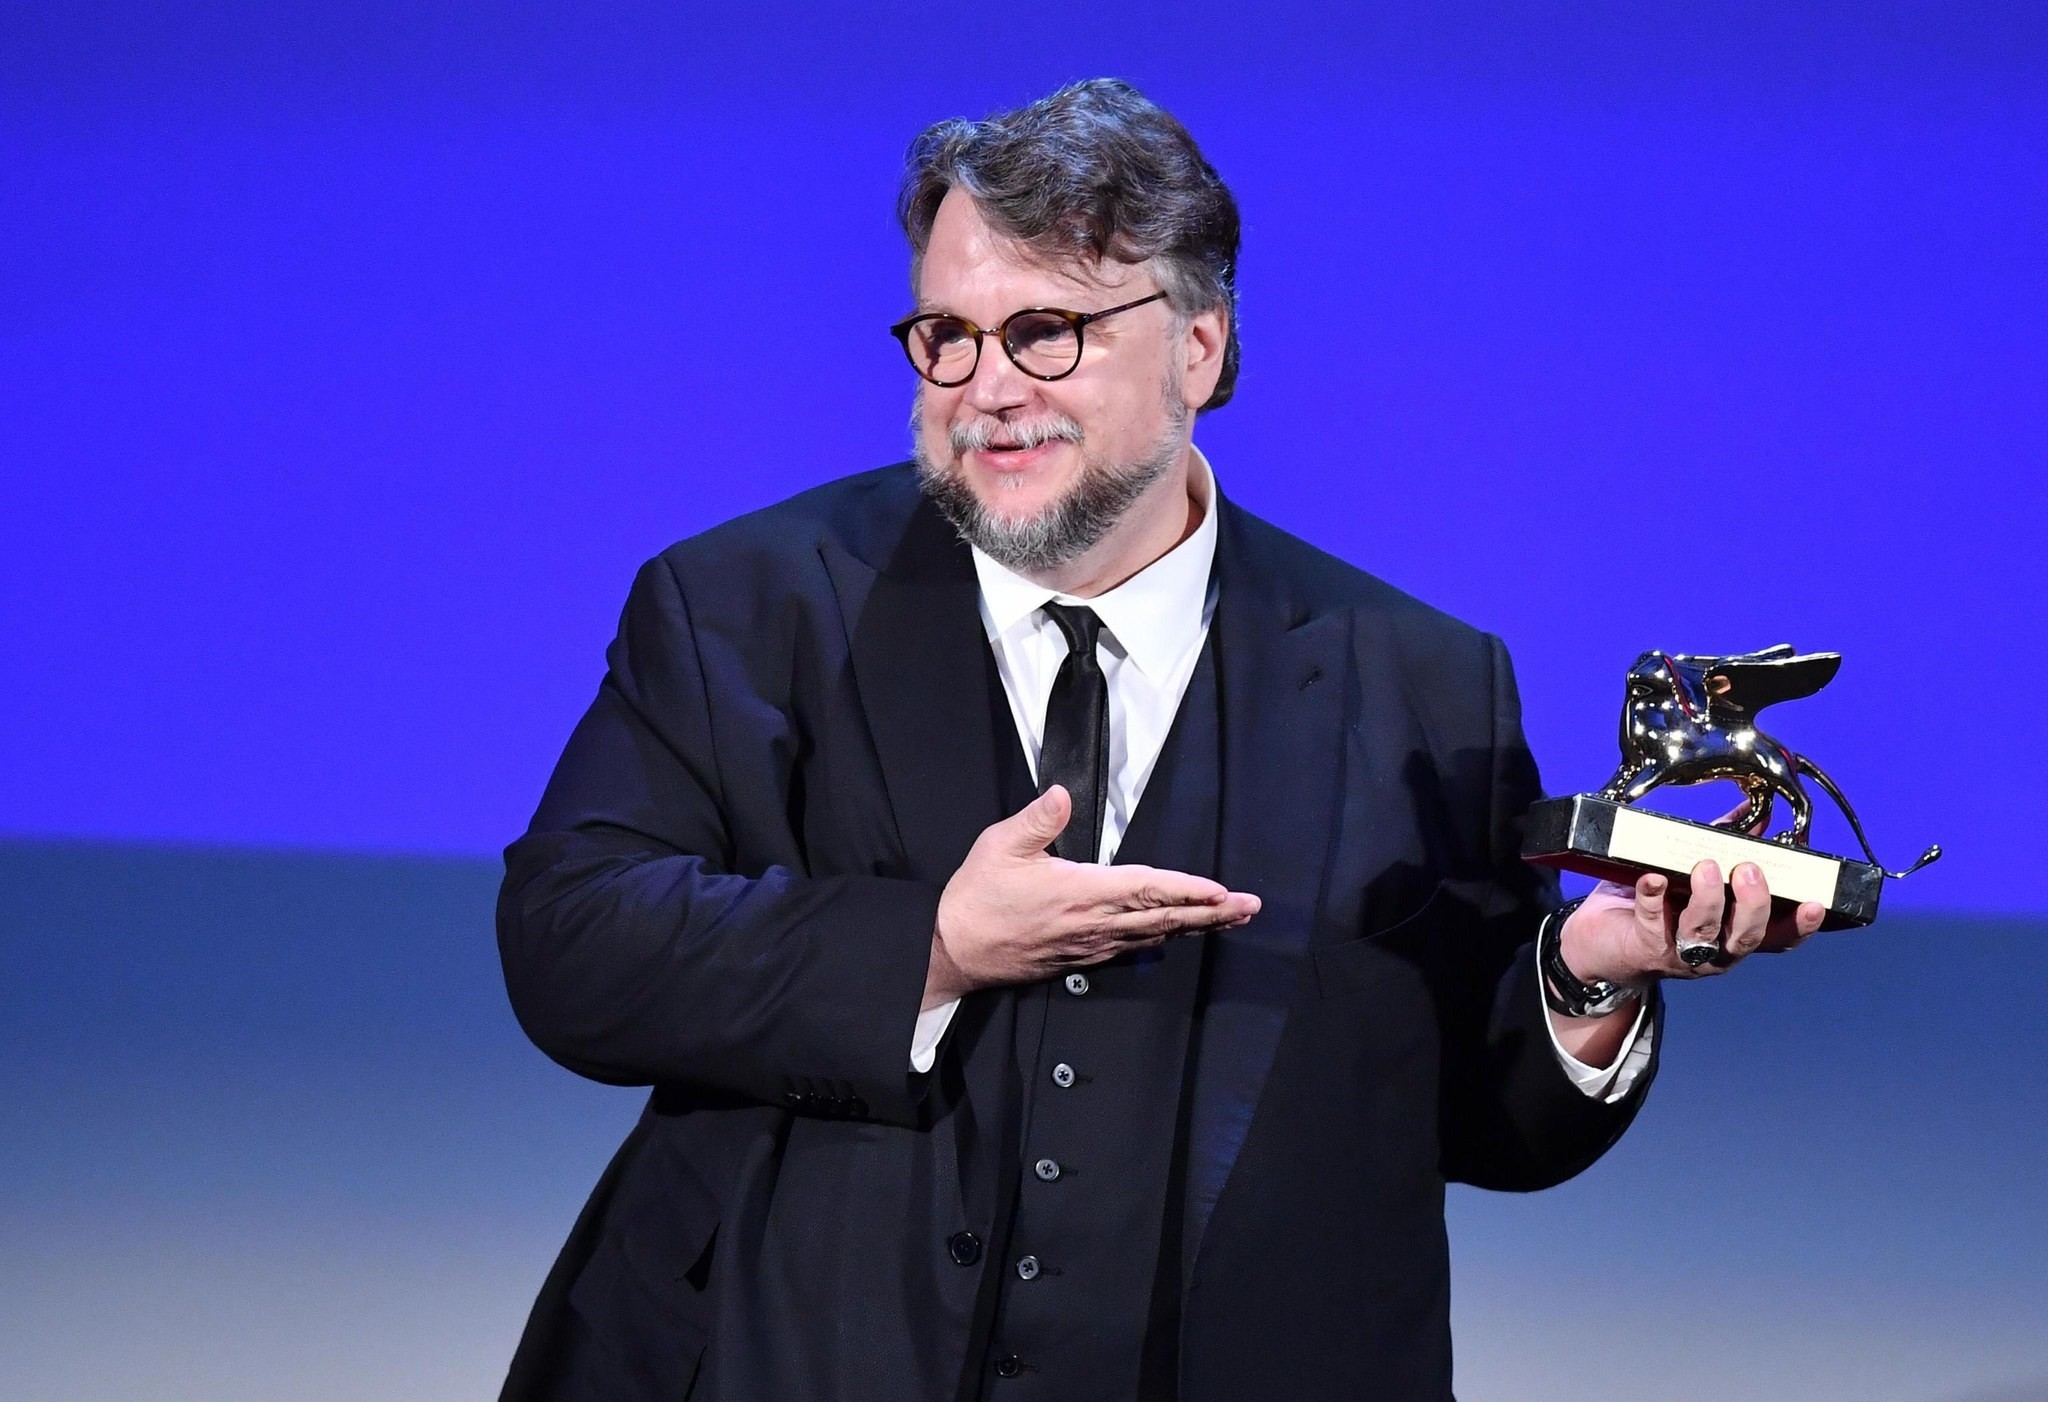 Mexican director Guillermo Del Toro holds the Golden Lion award during the awarding ceremony of the 74th annual Venice International Film Festival, in Venice, Italy, 09 September 2017. (EPA Photo)